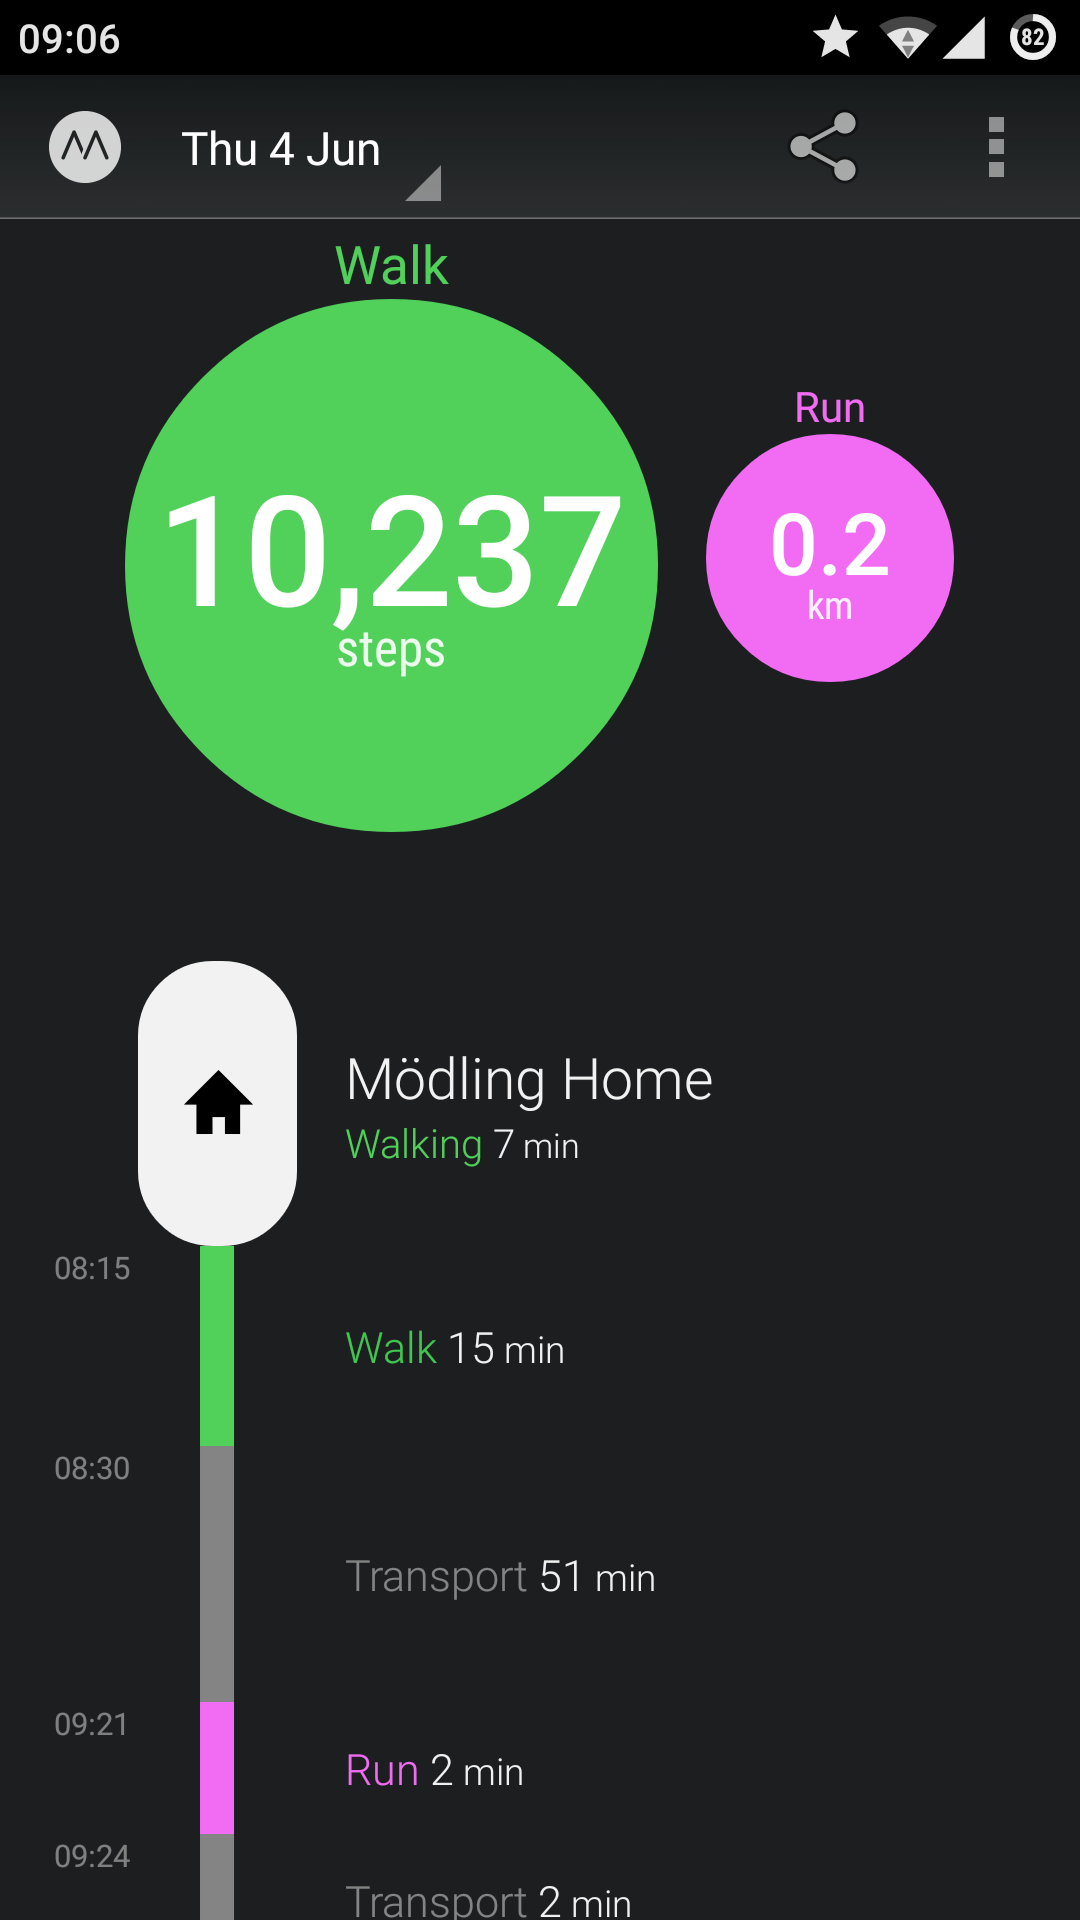 A typical day as seen in Moves App